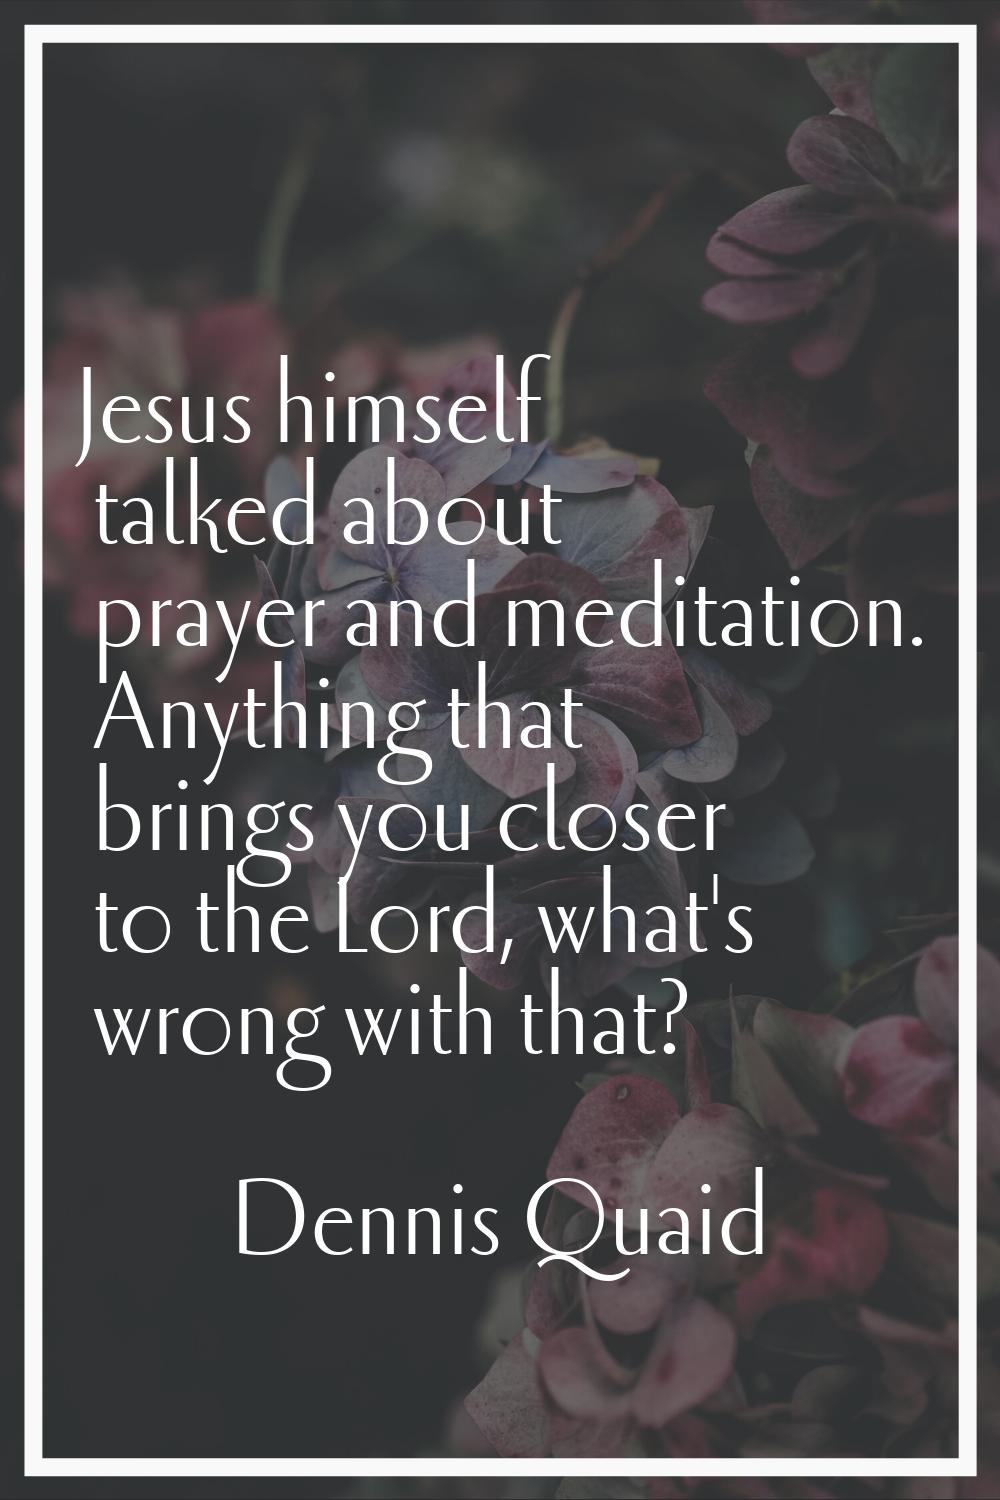 Jesus himself talked about prayer and meditation. Anything that brings you closer to the Lord, what